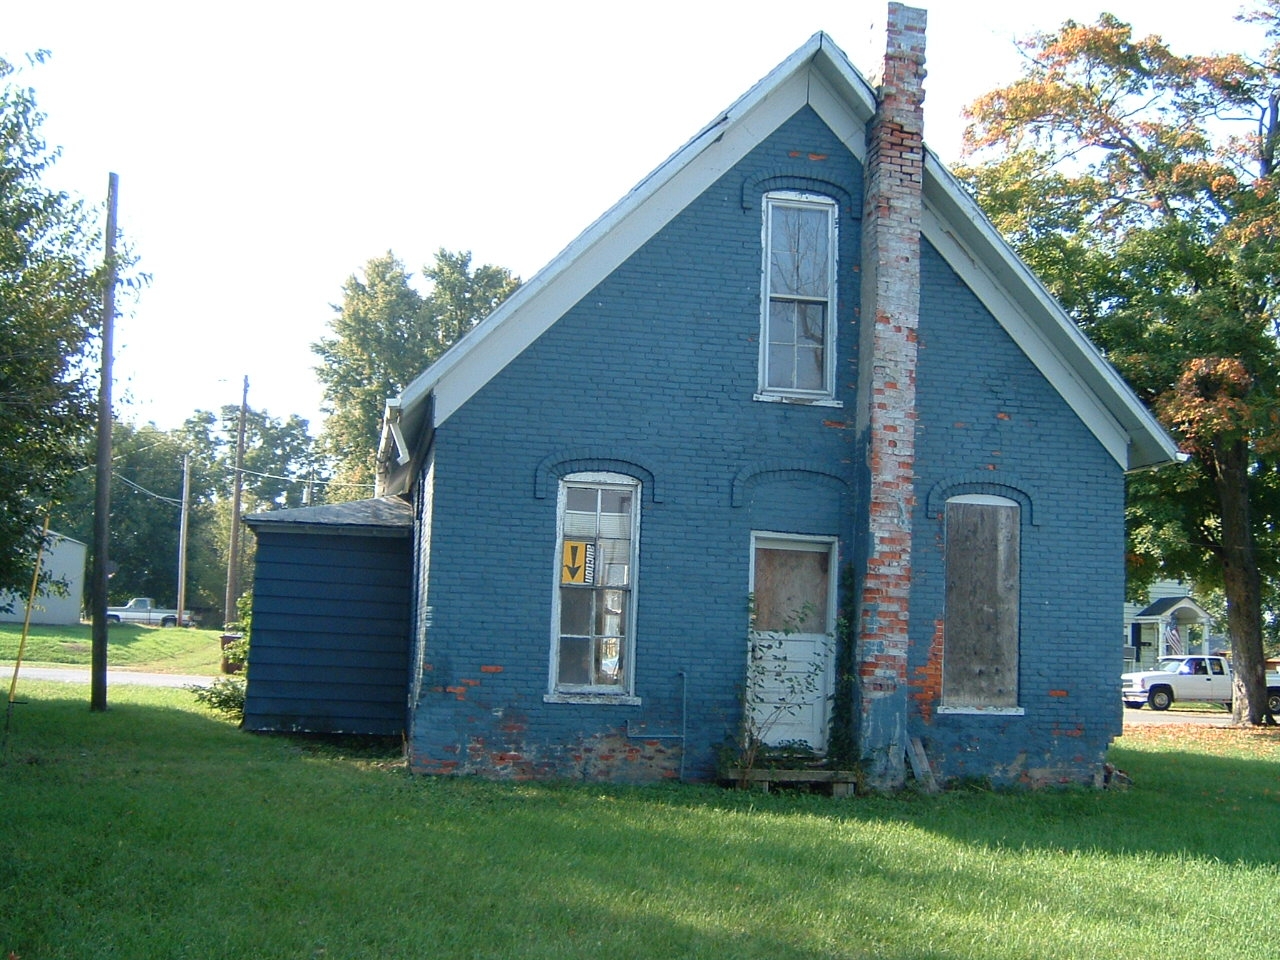 Grant Street Property, Rear View, Before Restoration